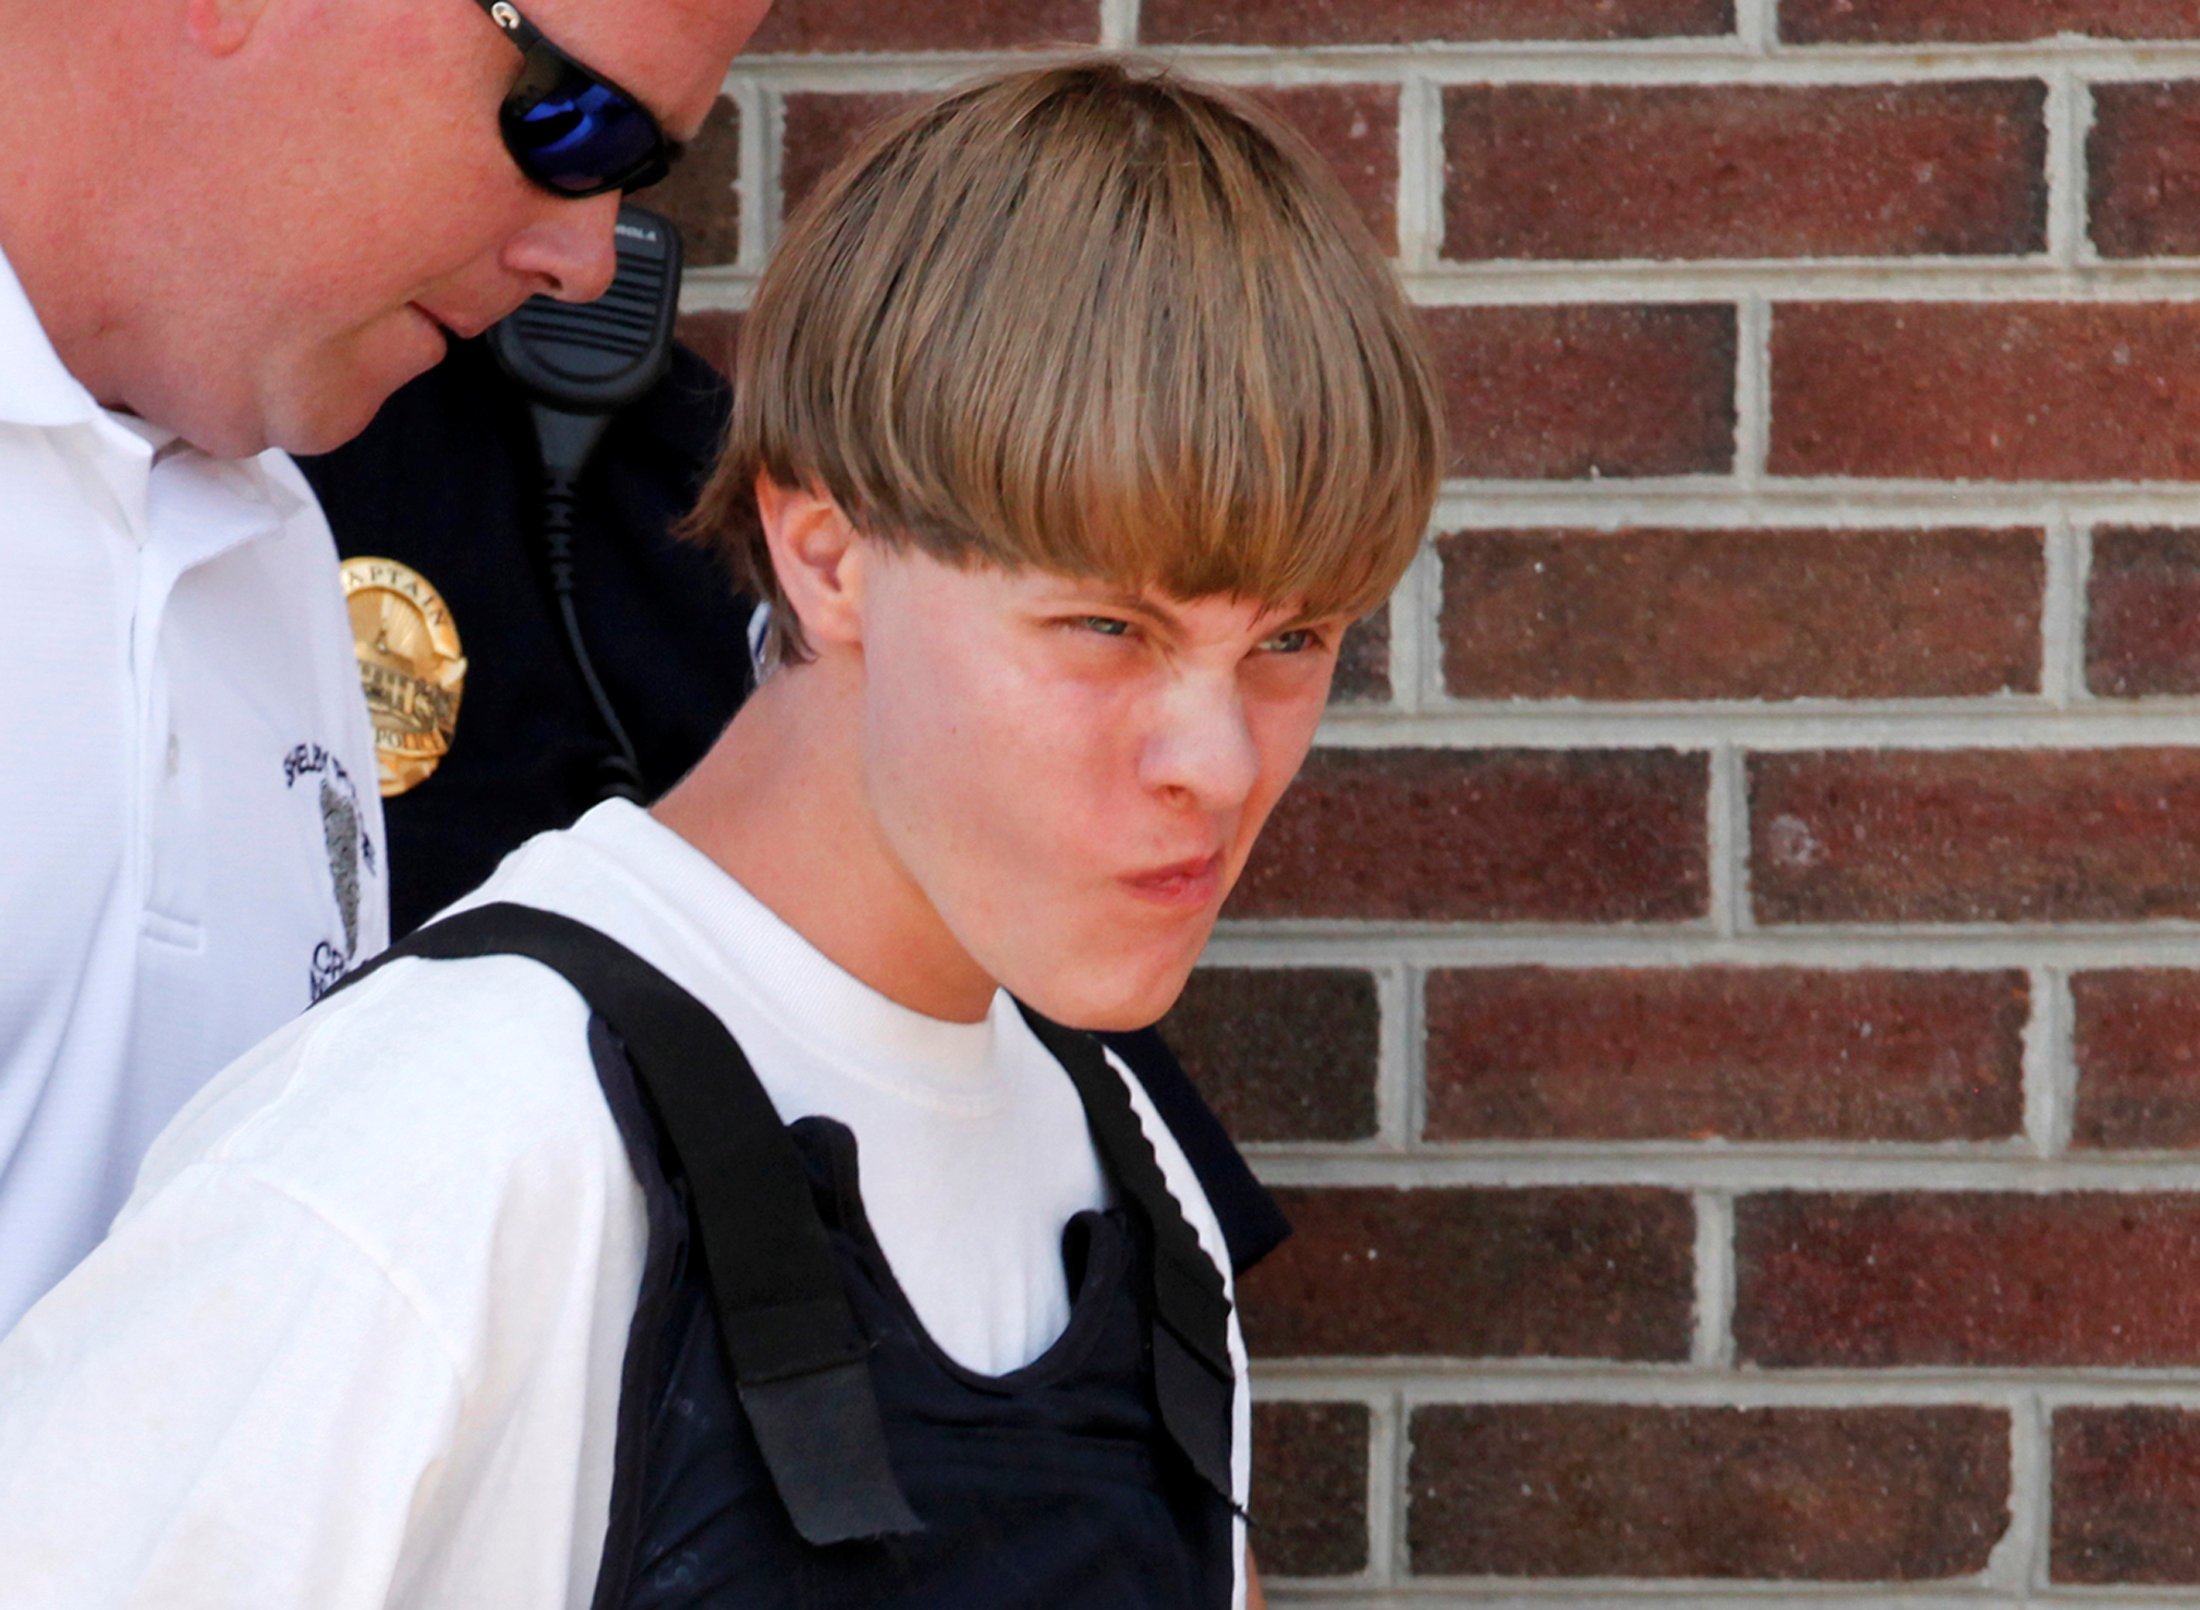 Police lead Dylann Roof into the courthouse in Shelby, NC, June 18, 2015. (Jason Miczek—Reuters)